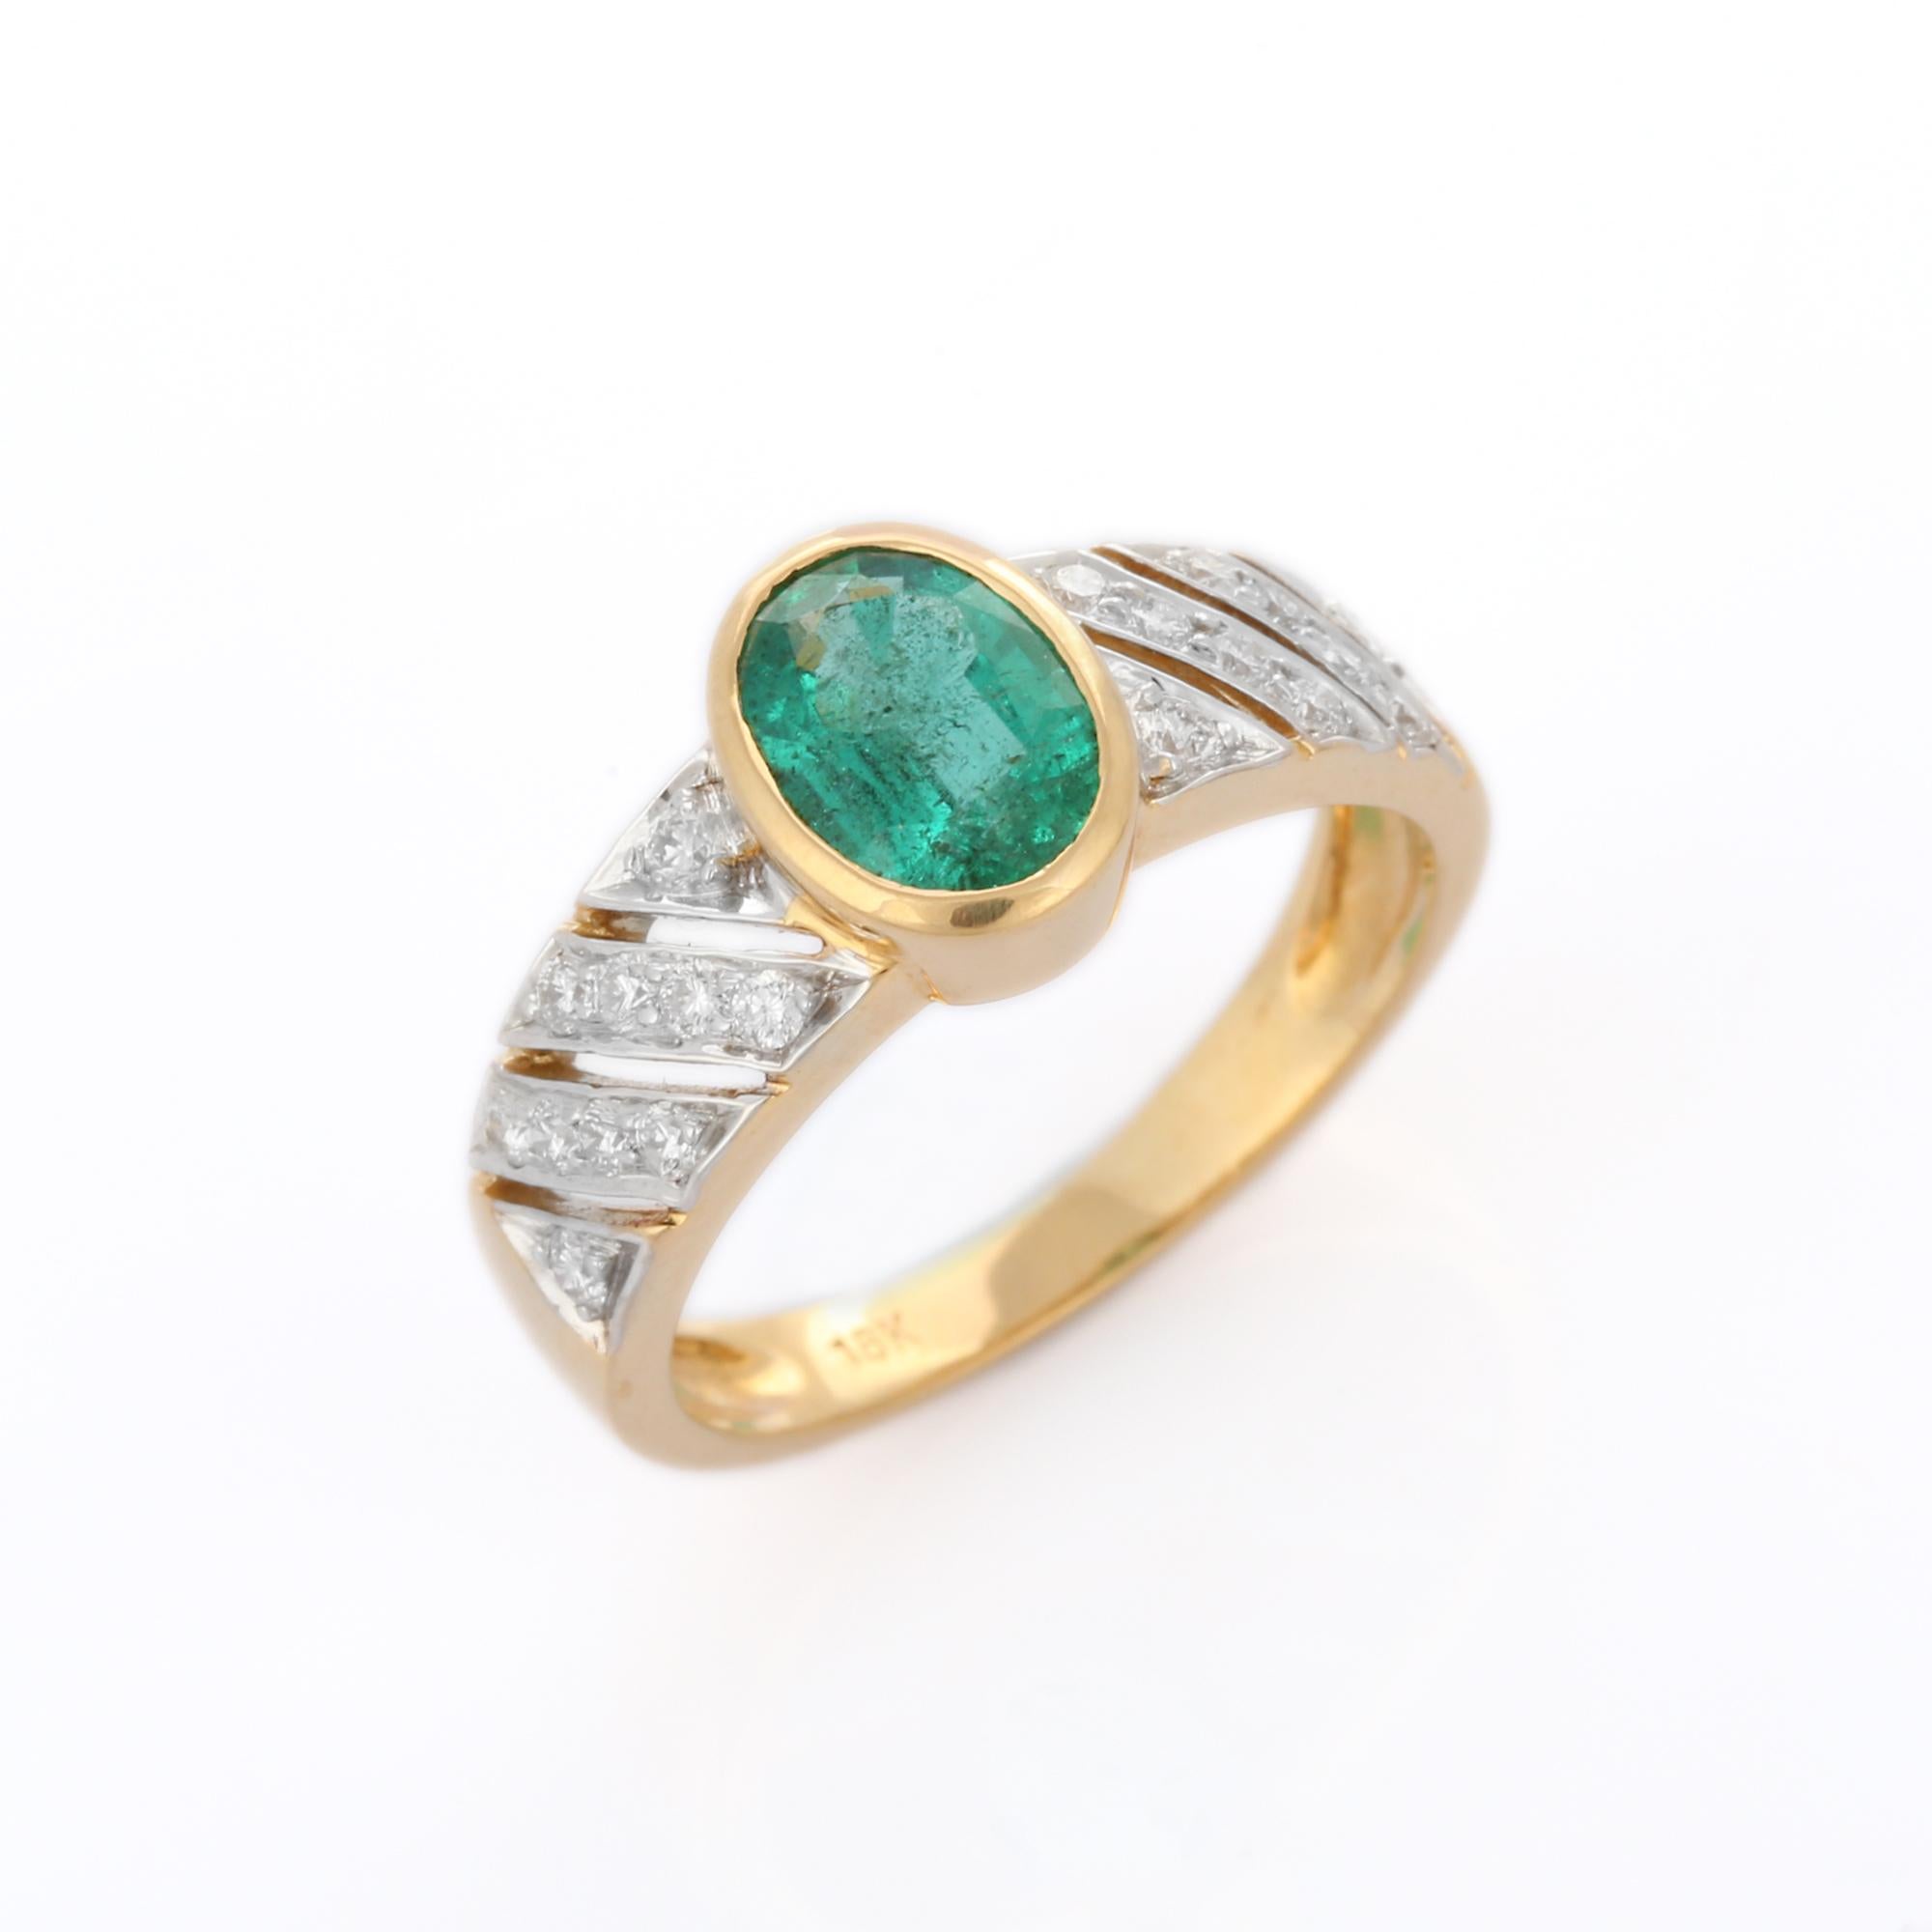 For Sale:  Exquisite Emerald and Diamond Engagement Ring for Men in 18k Yellow Gold 2